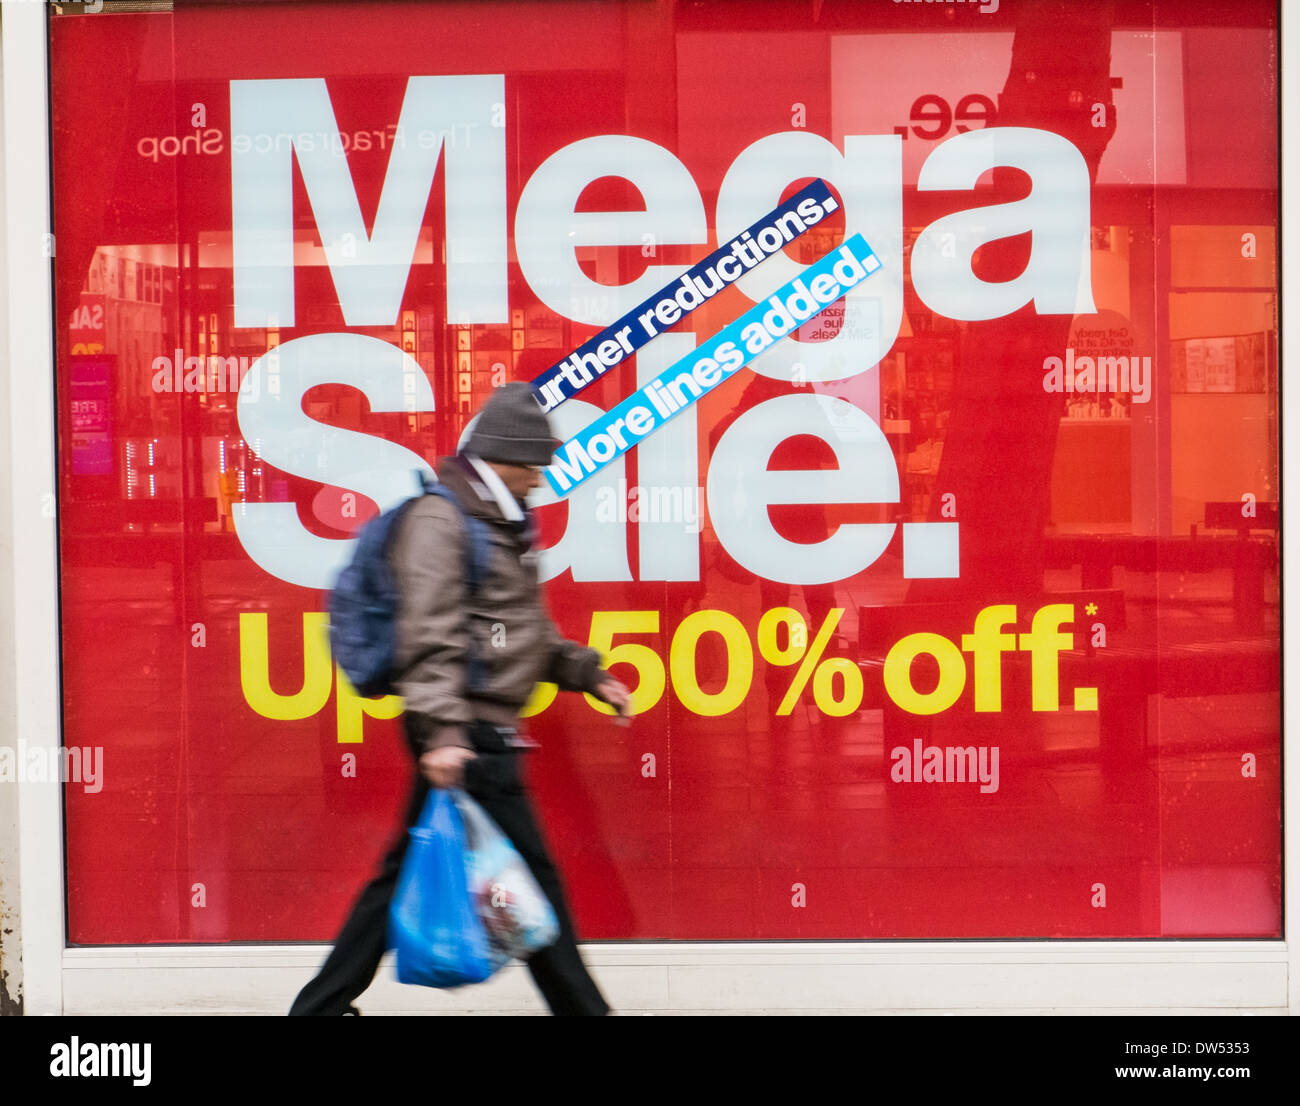 A motion blurred shopper carrying bags walking past a retail shop window display with a large red sale sign advertising discount Stock Photo